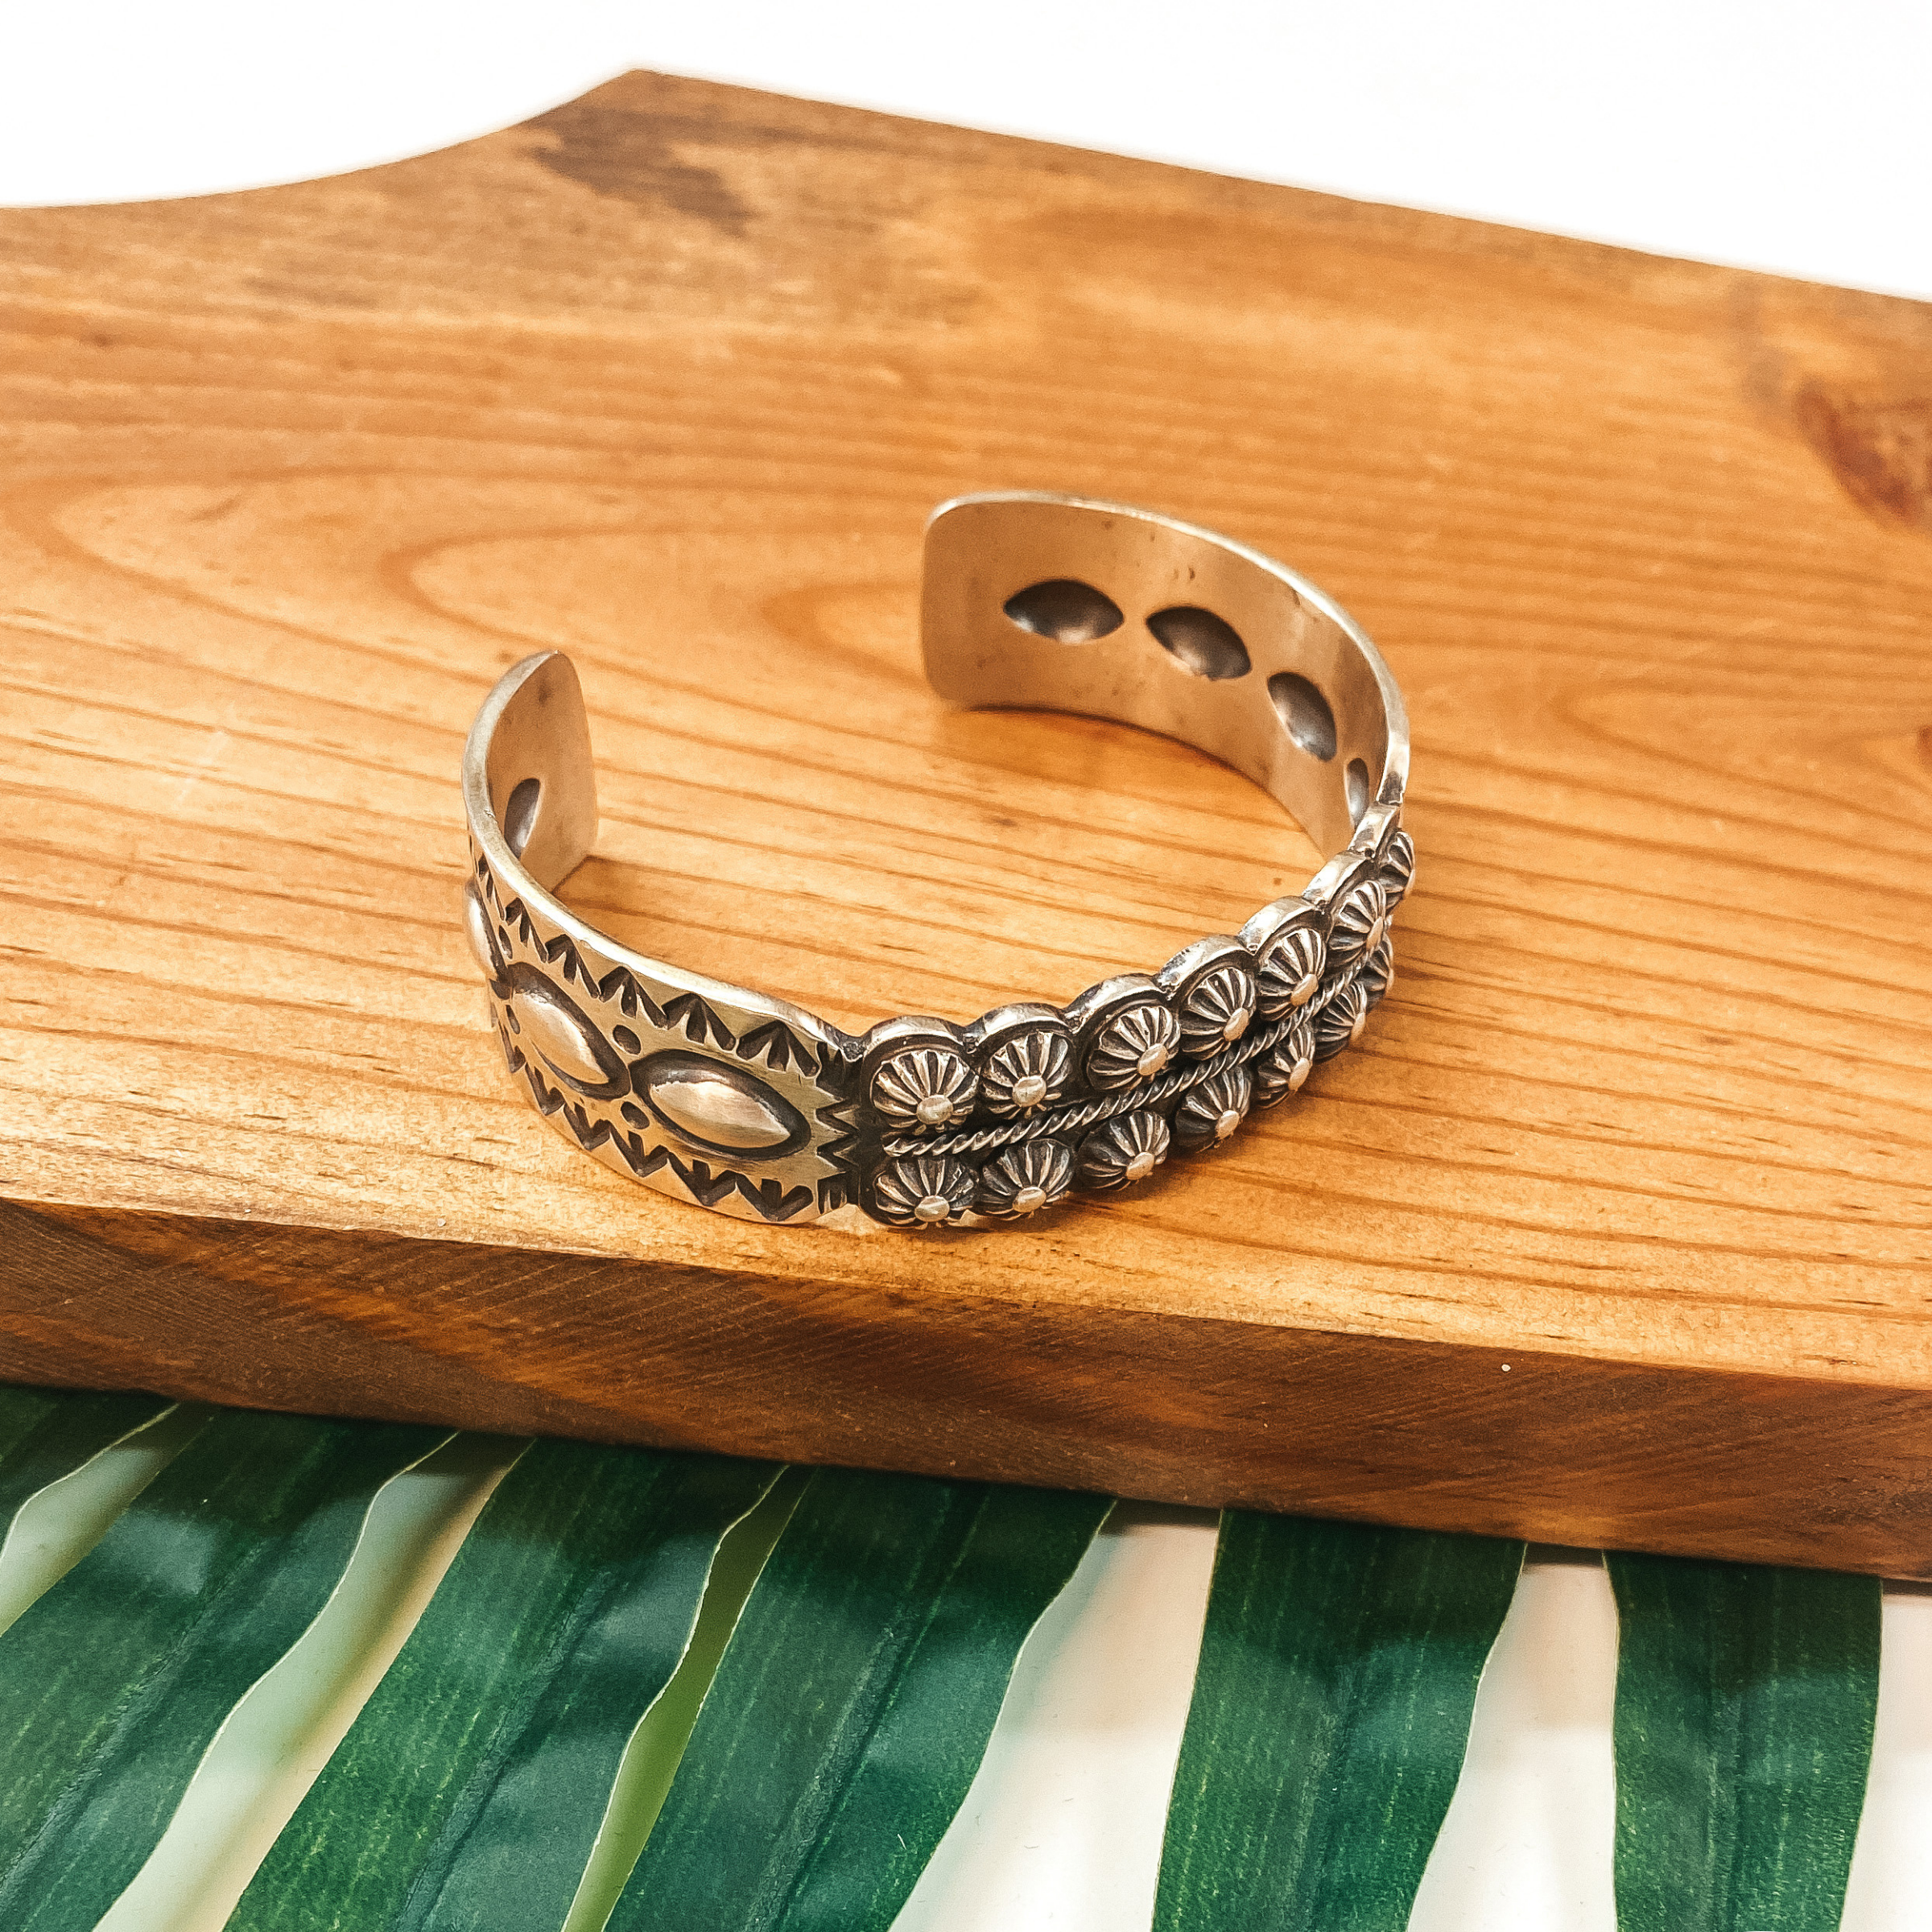 Moe | Navajo Handmade Sterling Silver Tooled Detailing Cuff Bracelet - Giddy Up Glamour Boutique